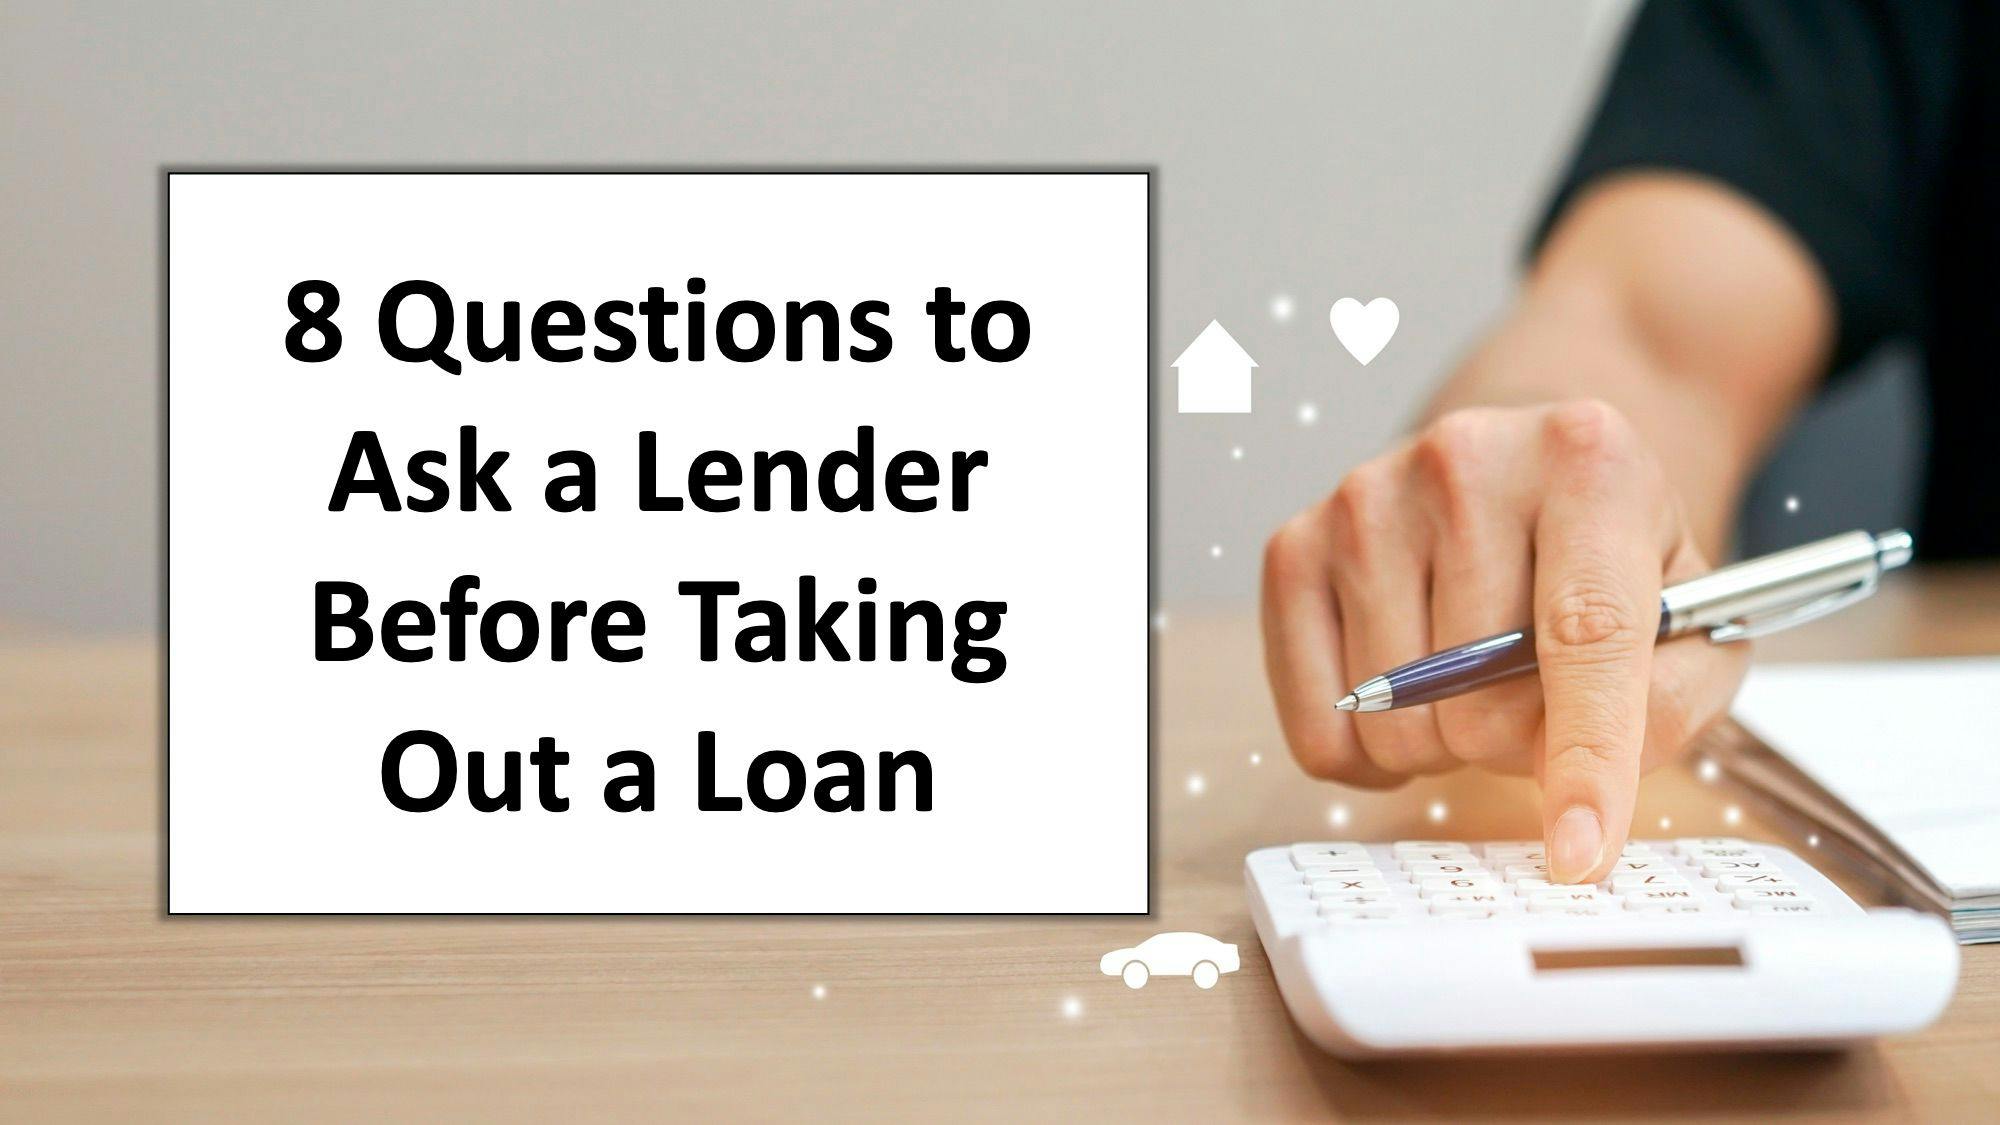 8 Questions to Ask a Lender Before Taking Out a Loan